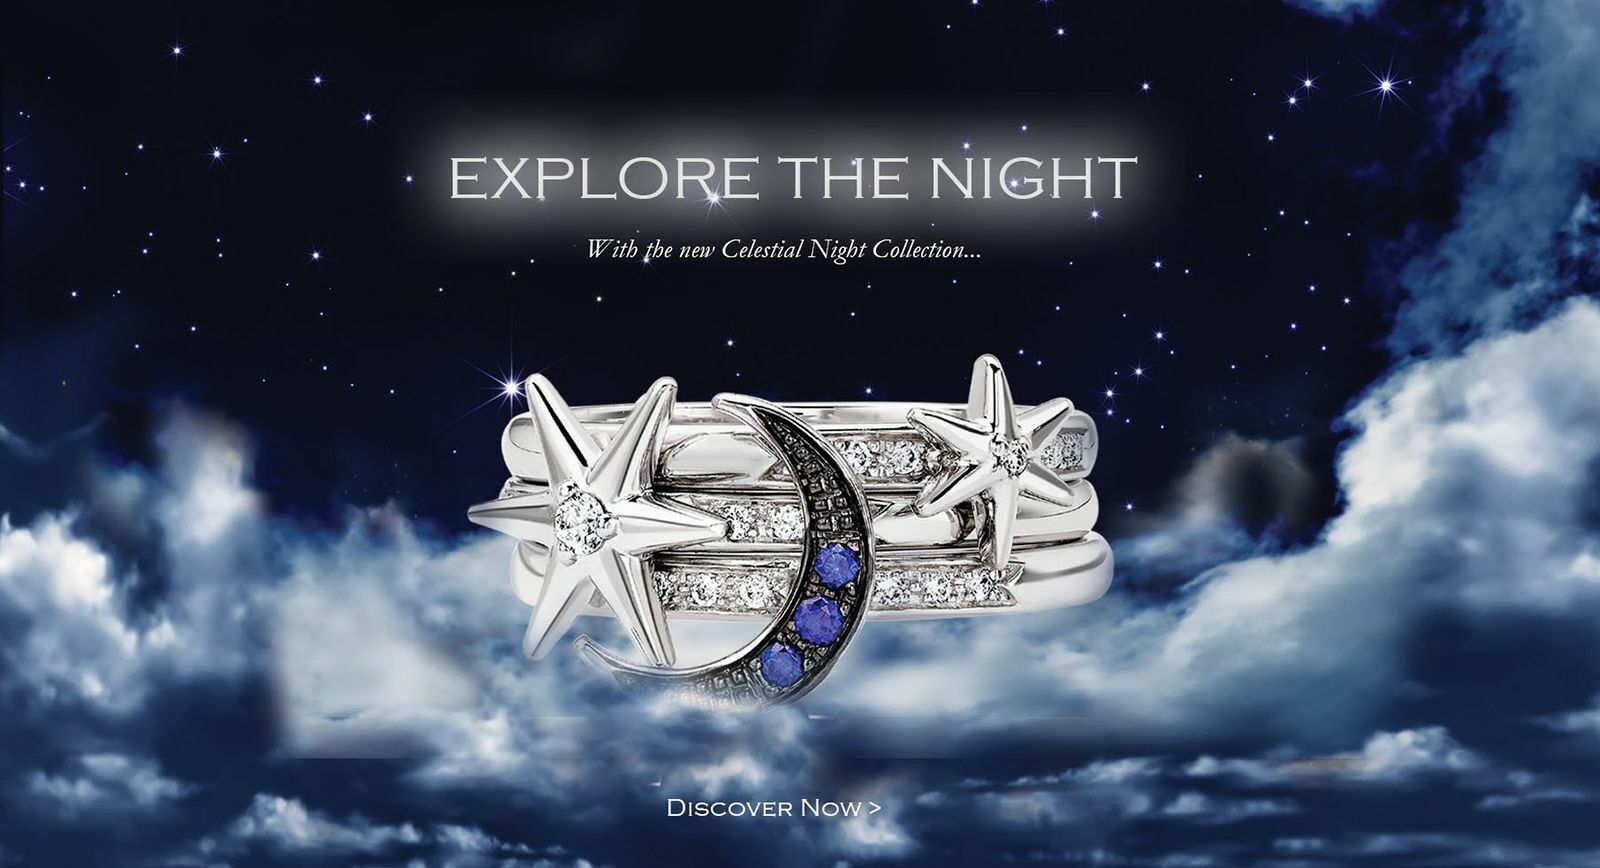 New Celestial Night Collection by Theo Fennell